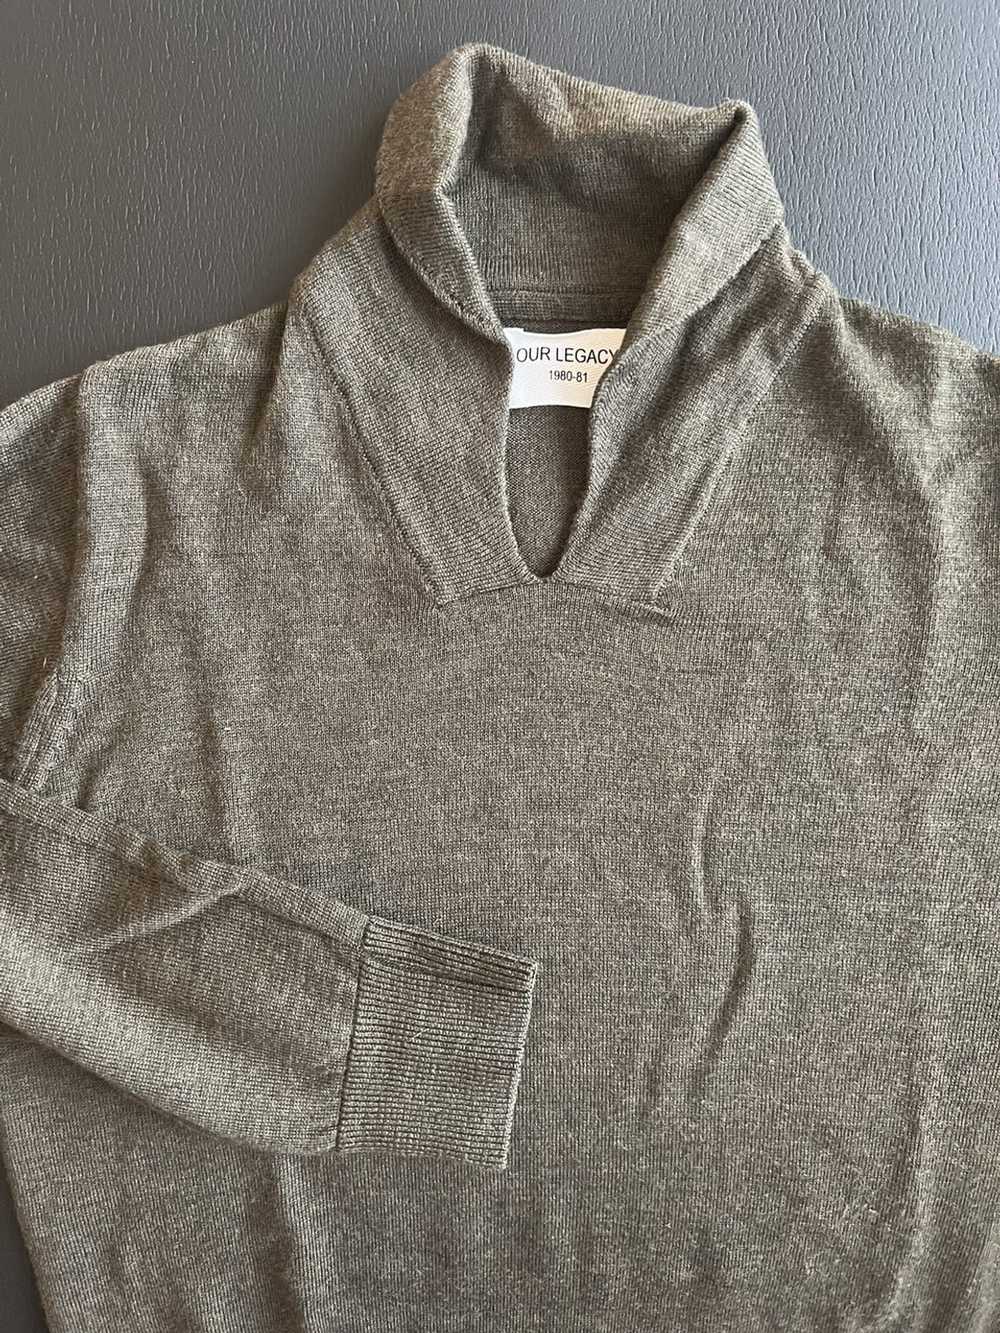 Our Legacy Proper Collar sweater. Dark Olive - image 2